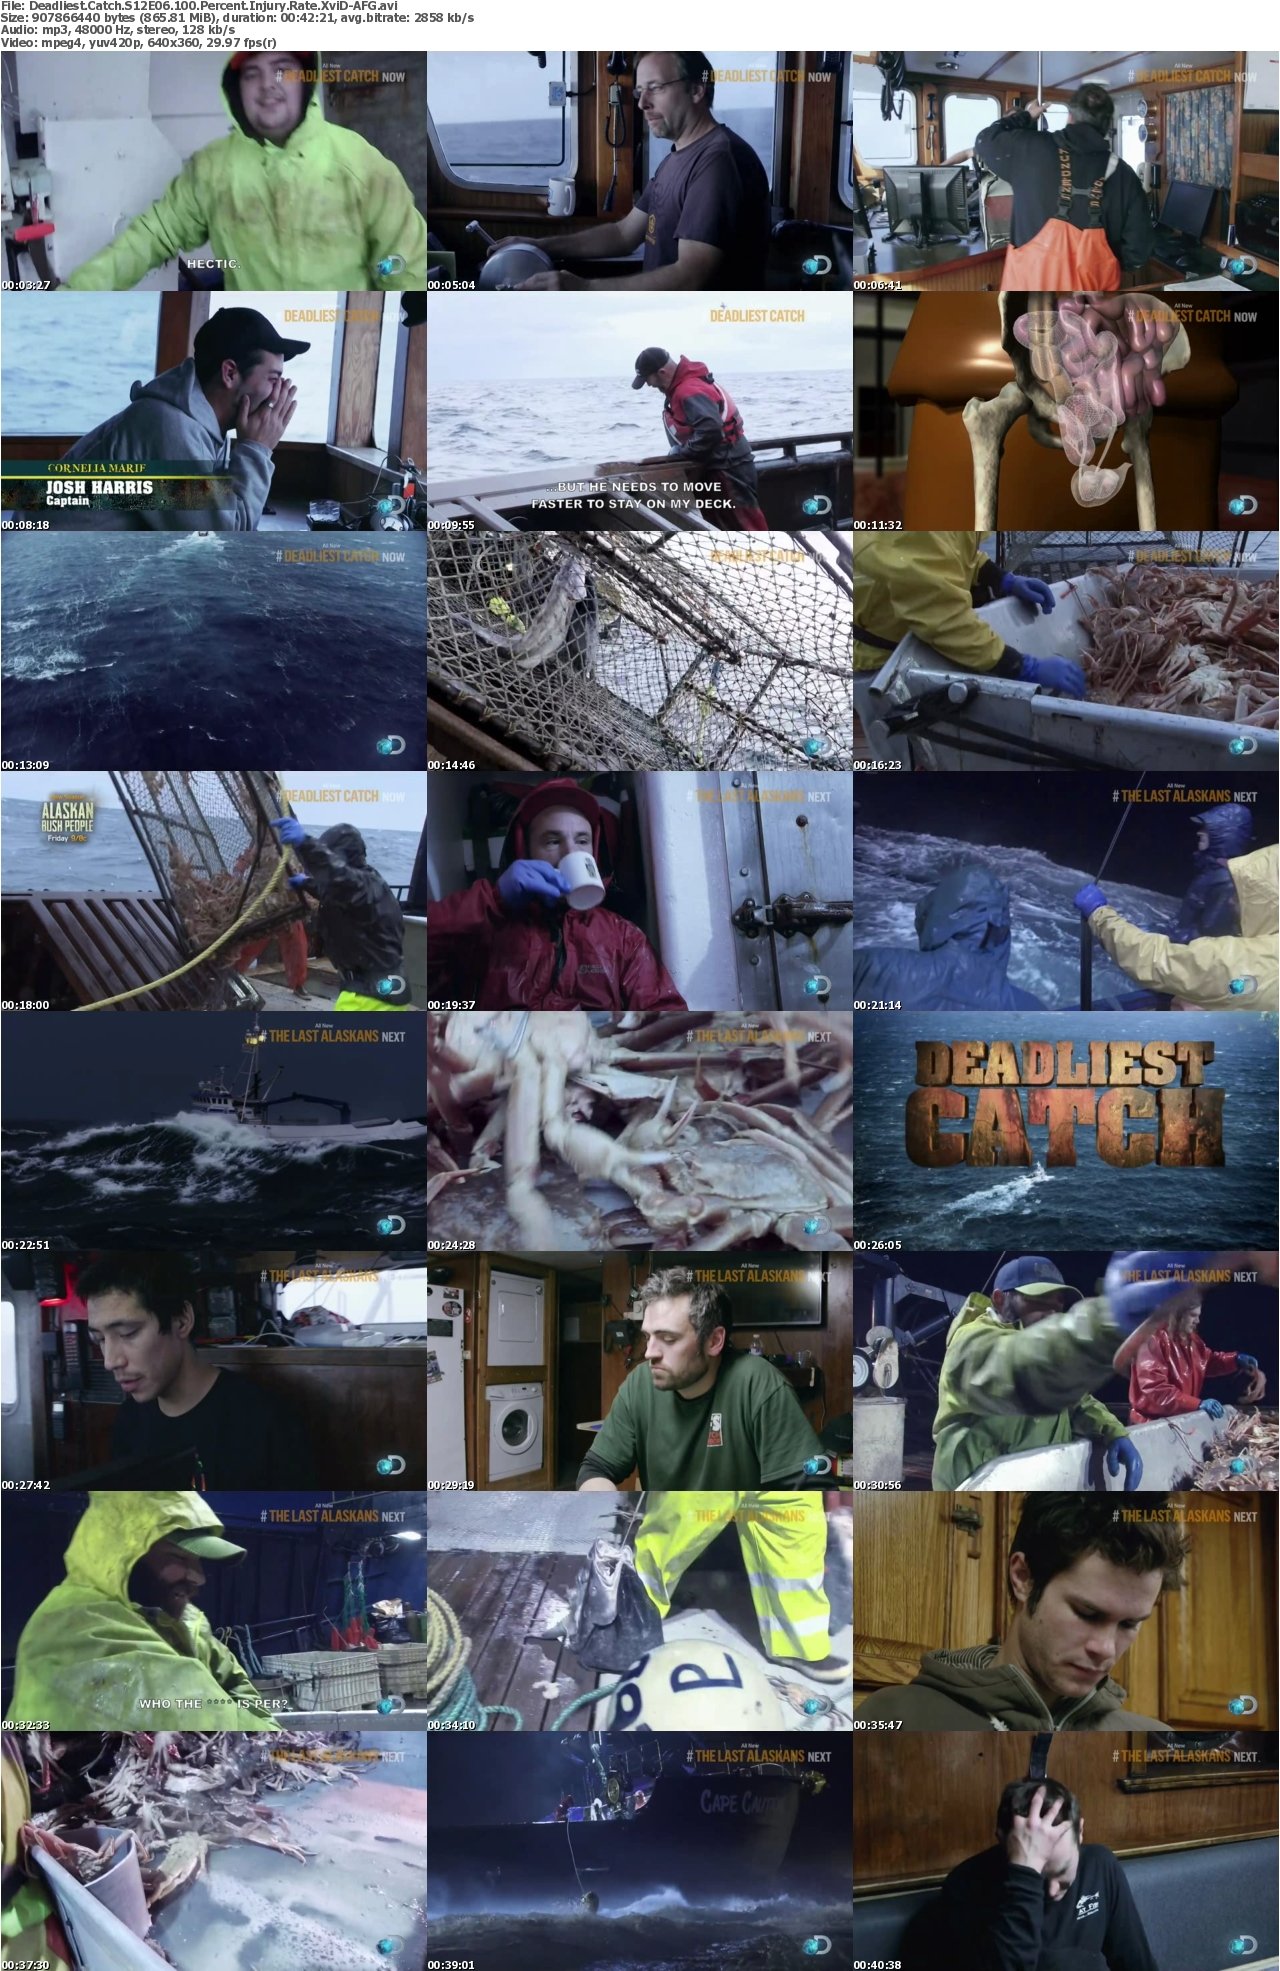 deadliest catch torrents free download Page: 2 search